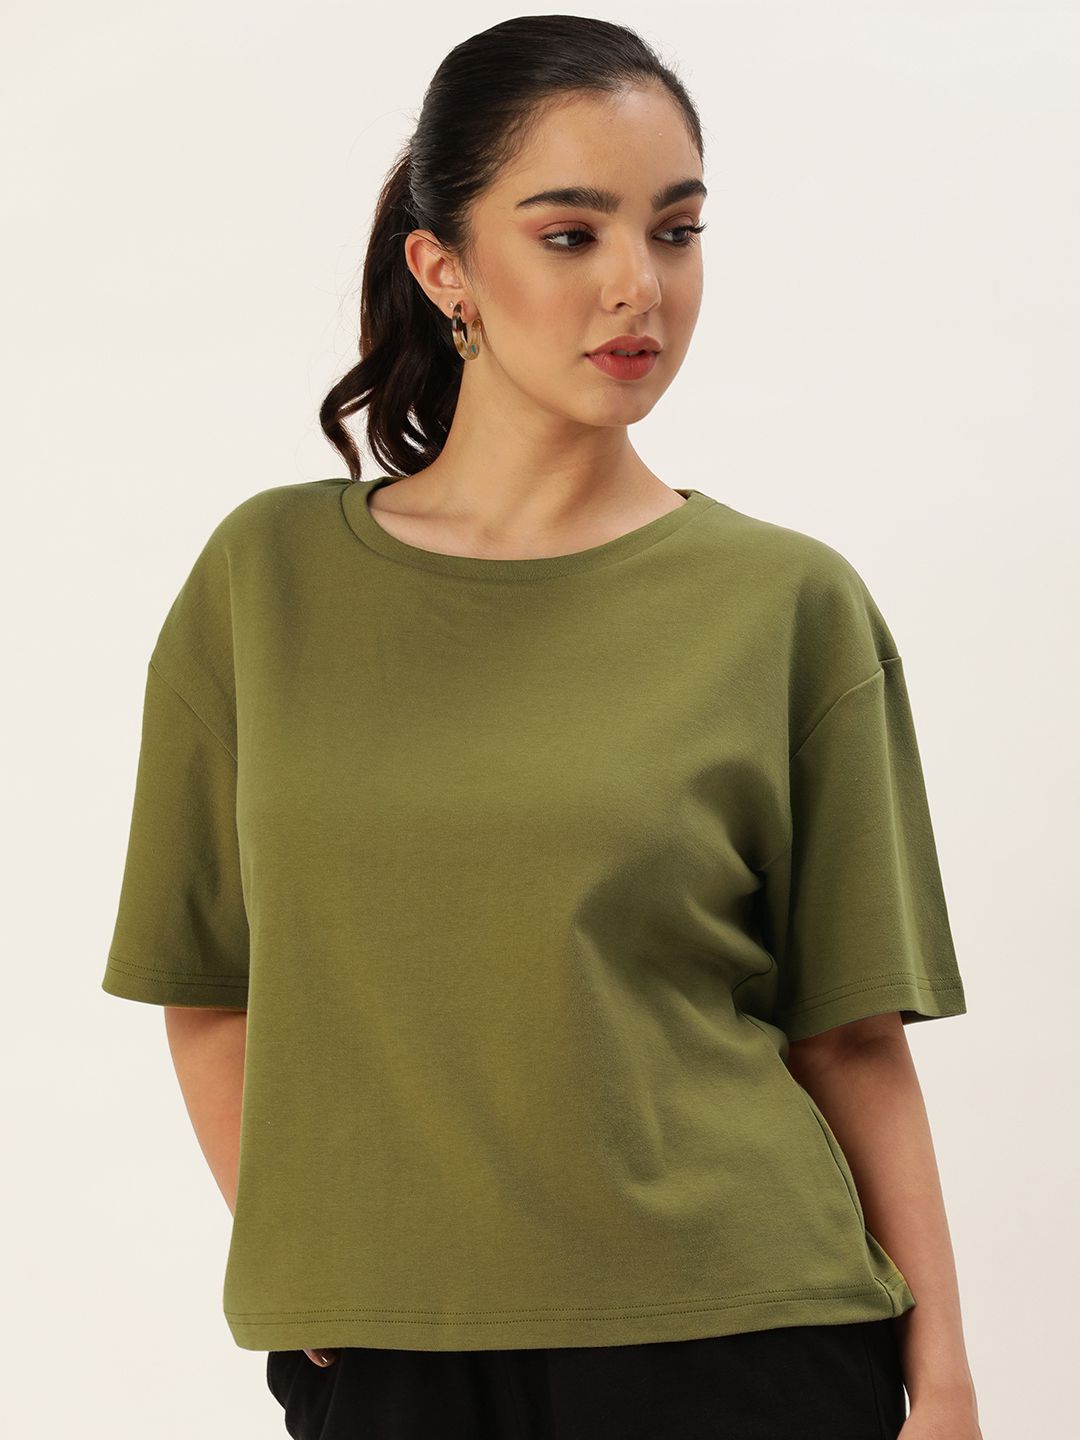     			Bene Kleed Green Cotton Loose Fit Women's T-Shirt ( Pack of 1 )